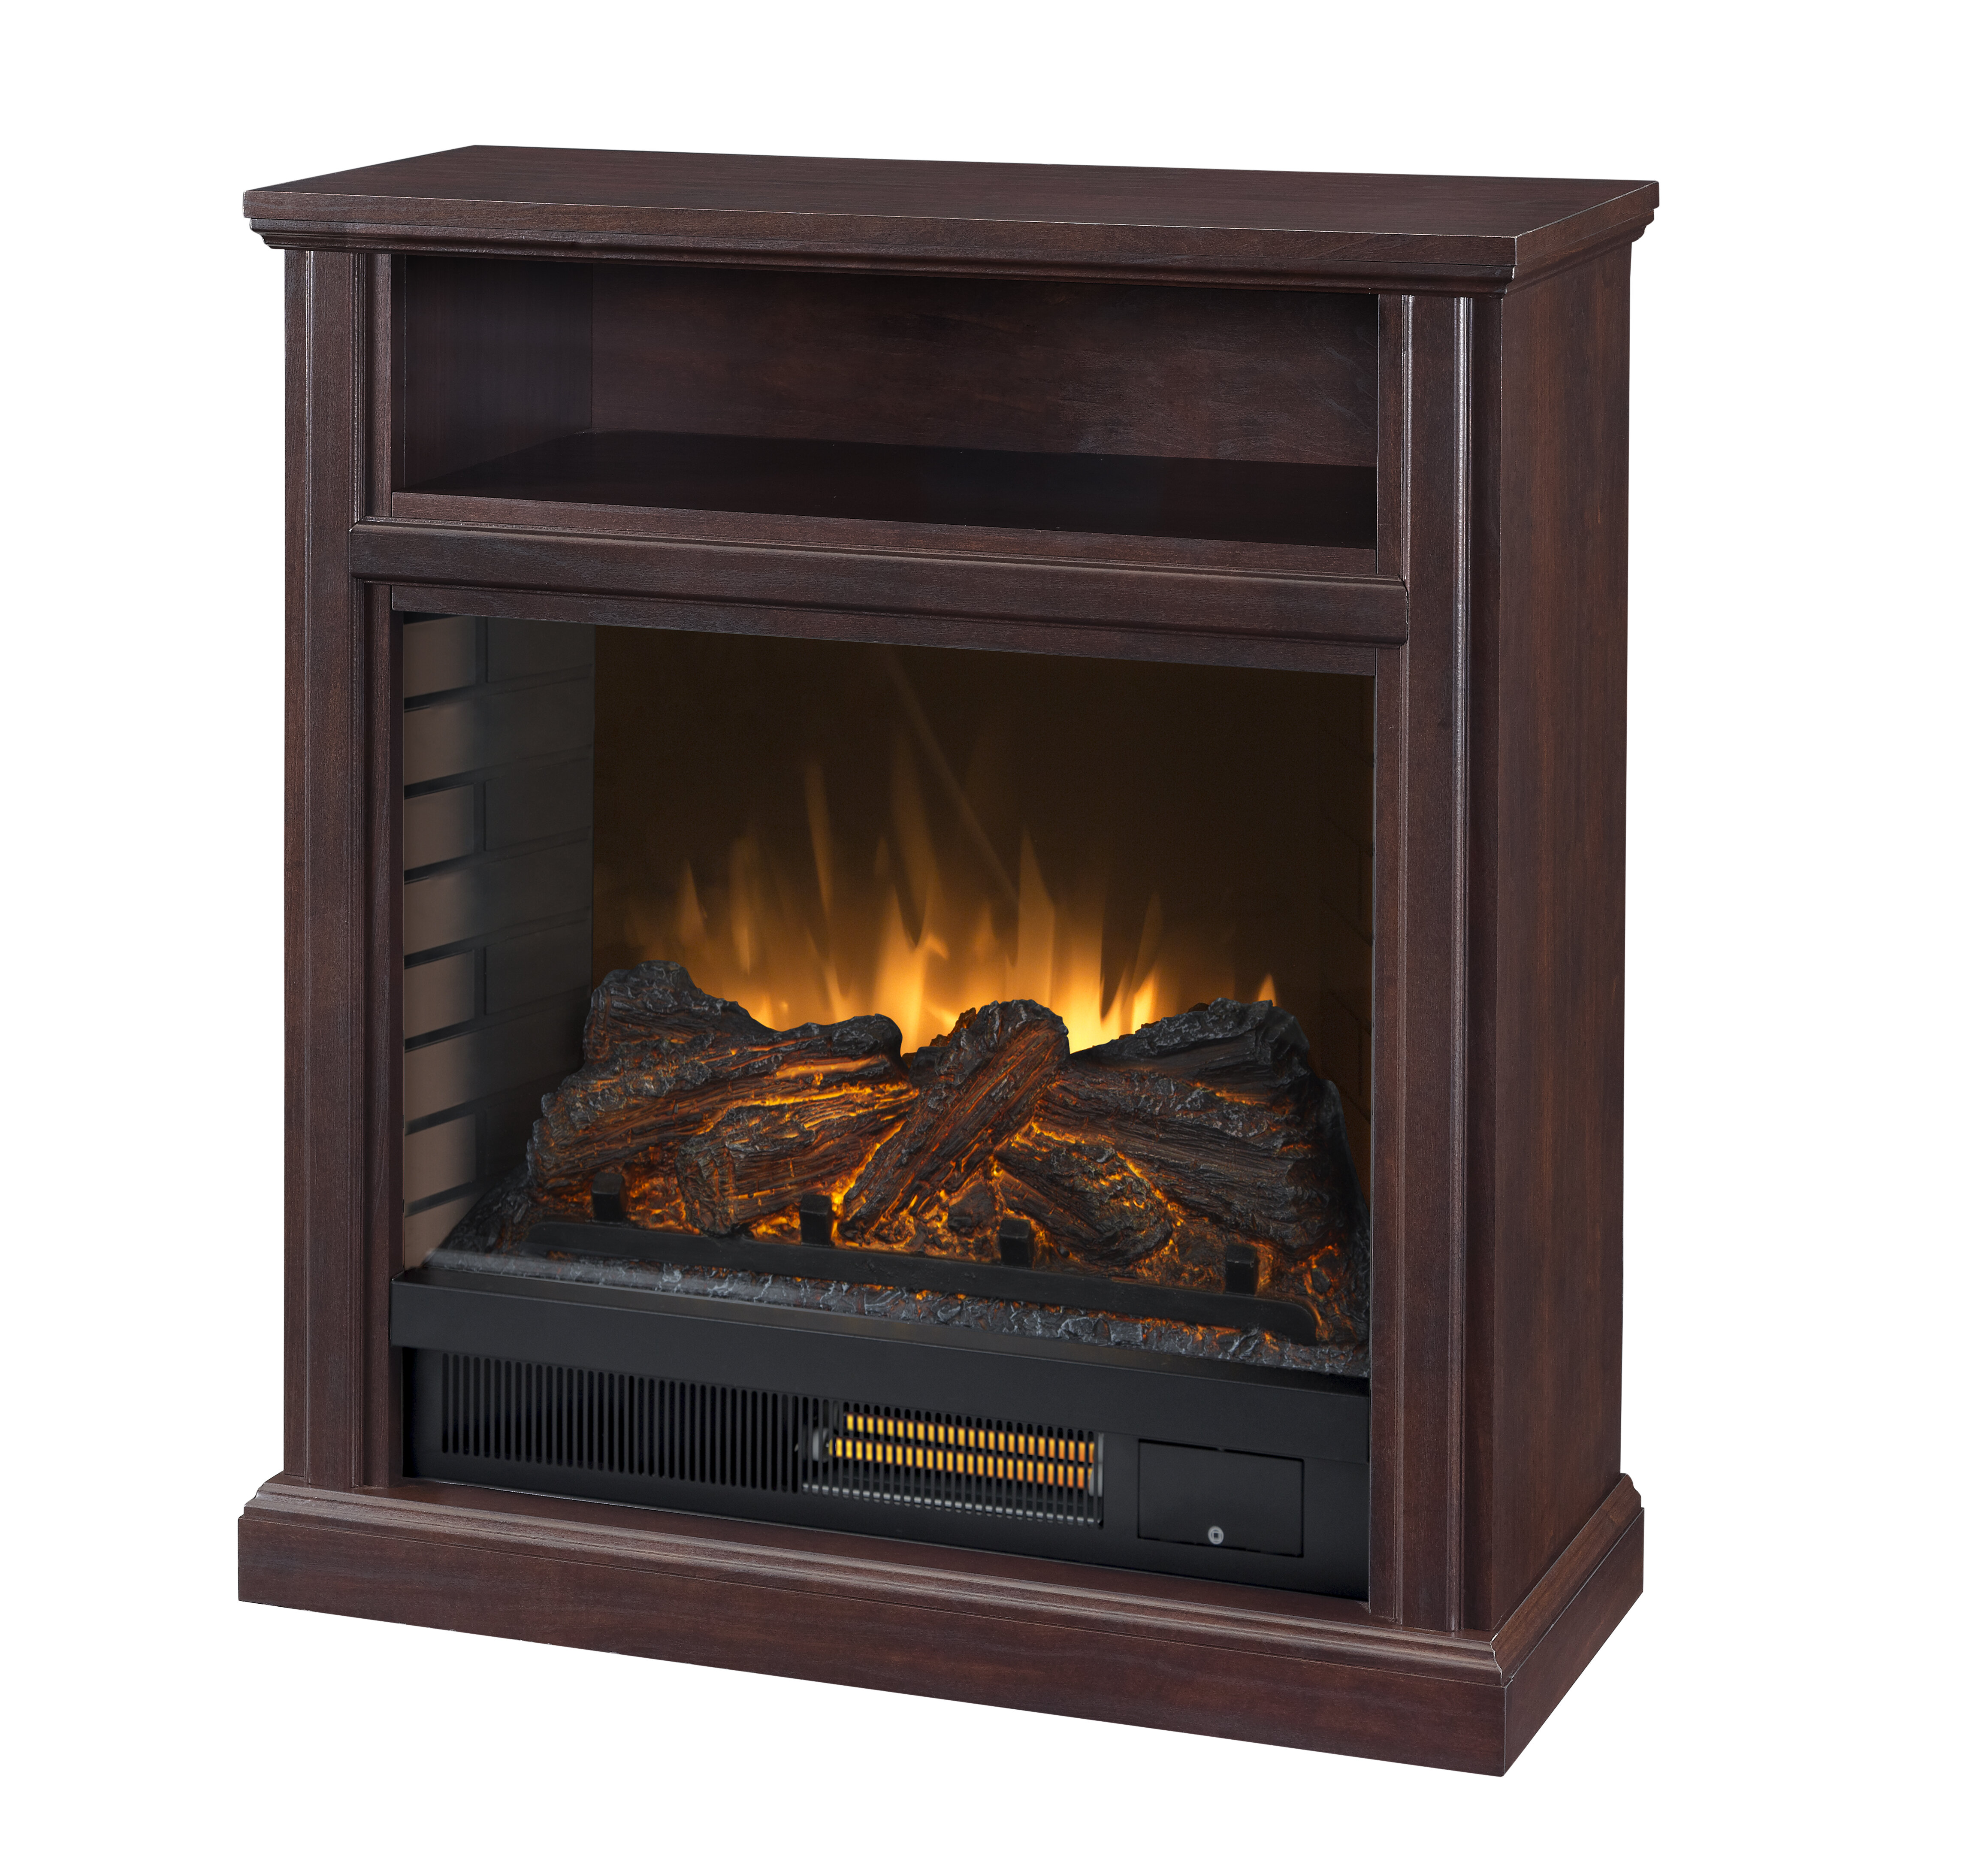 Wayfair Electric Fireplace Insert Unique Media Fireplace with Remote